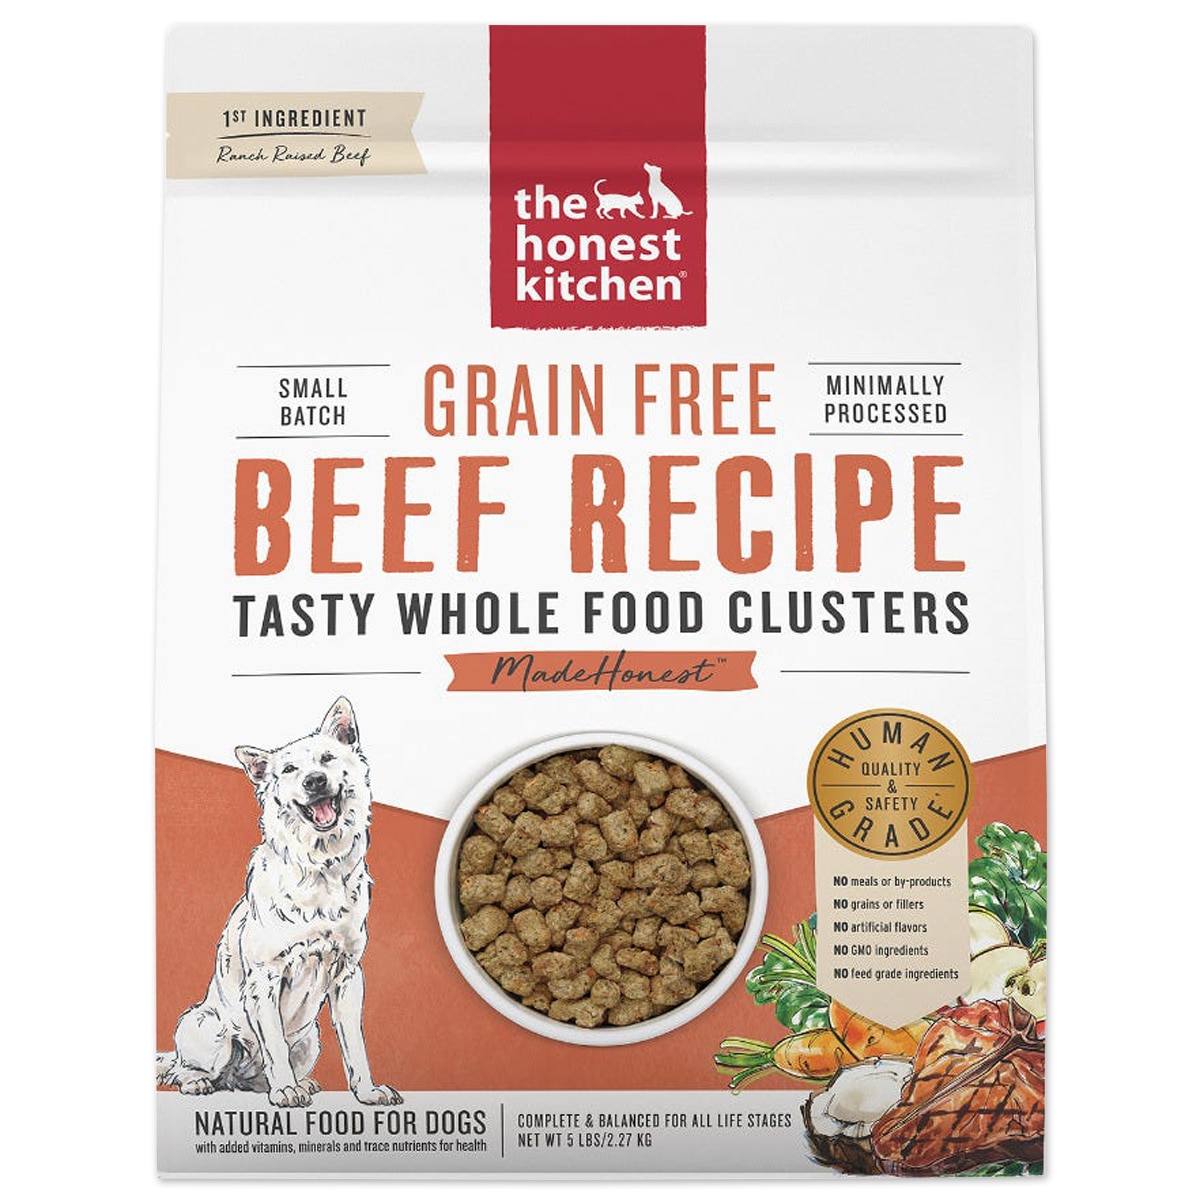 The Honest Kitchen Superfood Crisps Cod Fish Treats for Dogs